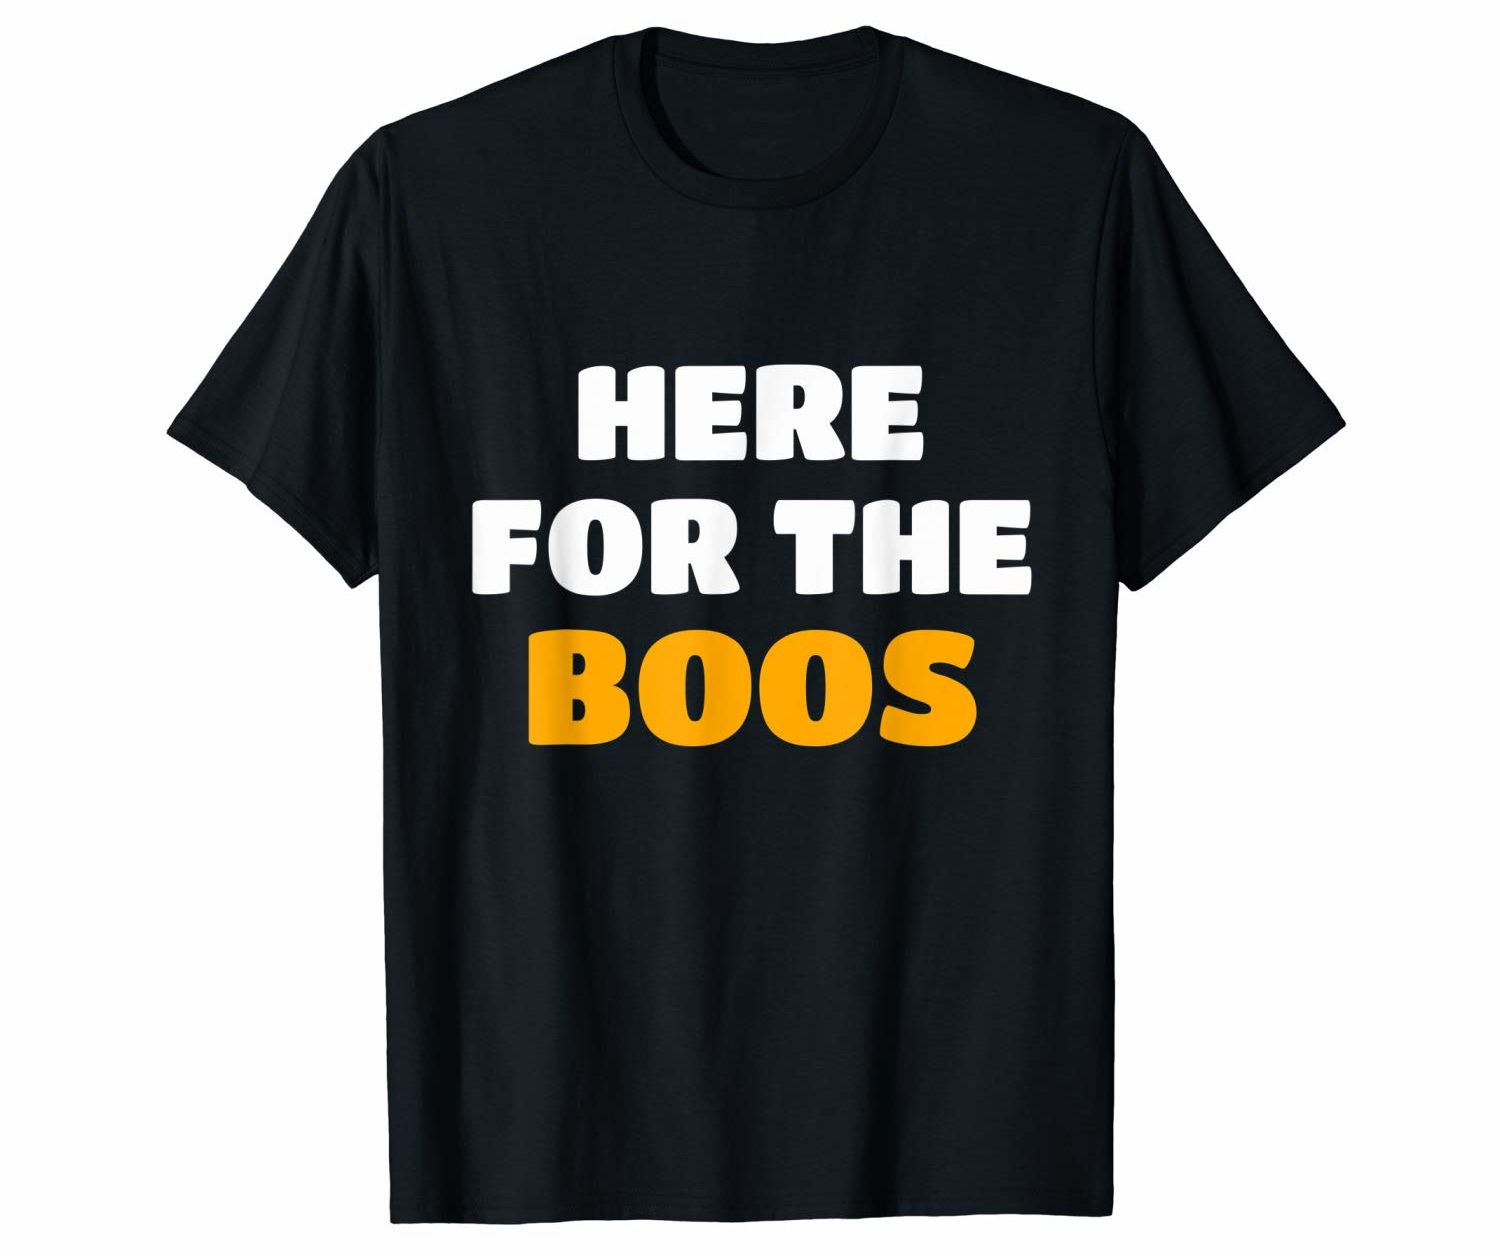 Funny Halloween Shirts 2022: Here For The Boos T-Shirt 2022